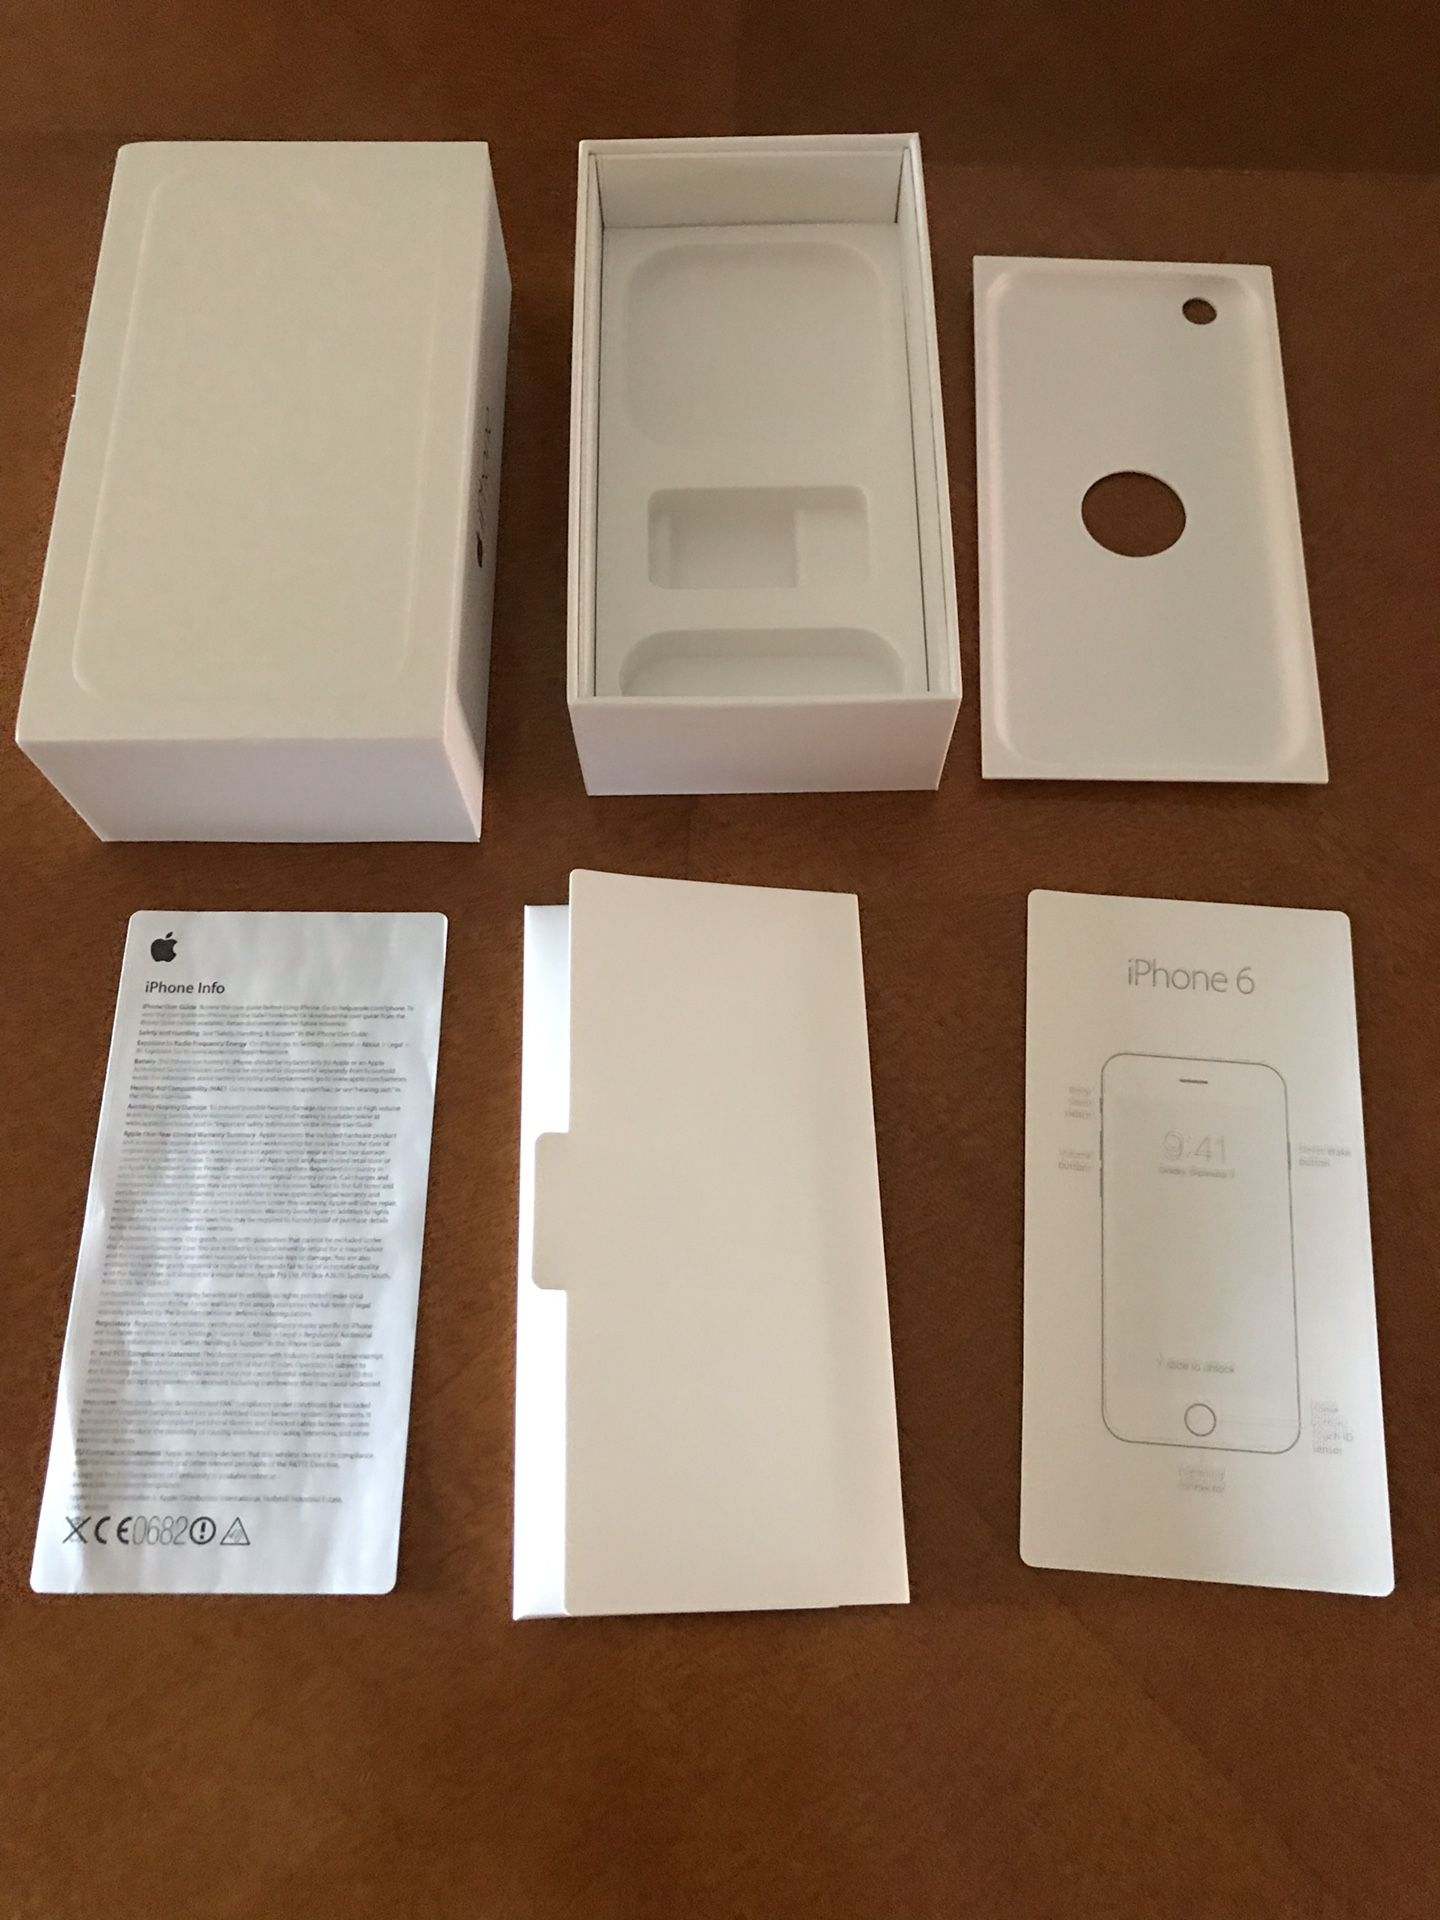 iPhone 5 S 32Gb - just the box without the phone